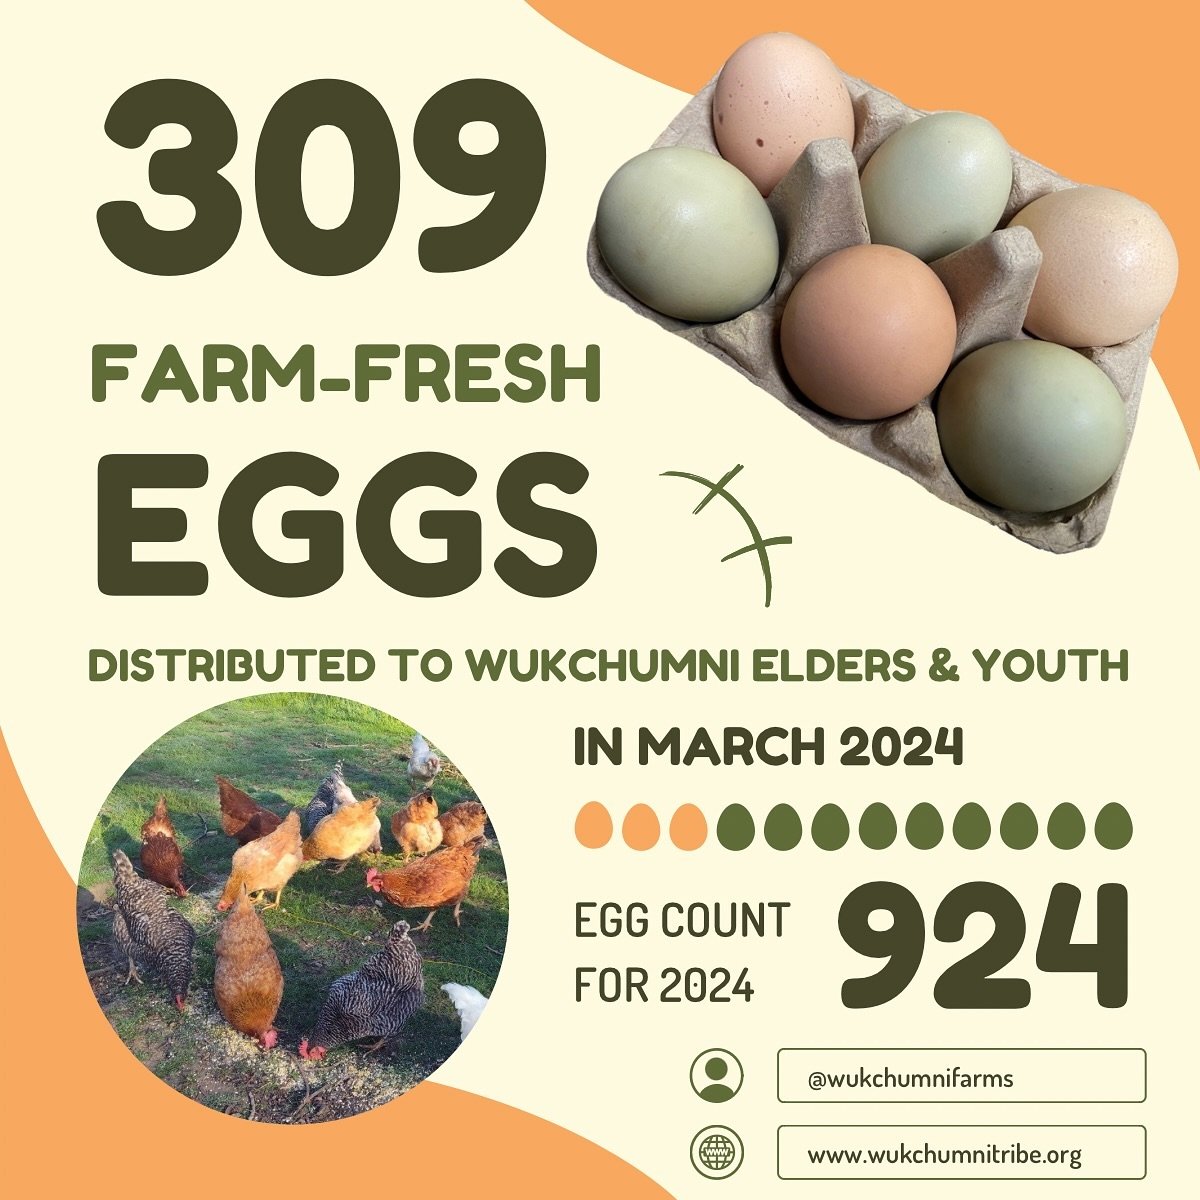 EGG UPDATE‼️🐓🥚
Our girlies are producing more than ever!! We were able to distribute a total of 309 EGGS in March! 🙌🏾🙌🏾🙌🏾
Shoutout to our Farm Manager Lahoci, Farm Assistants, and Interns for taking such great care of our flock and for gettin